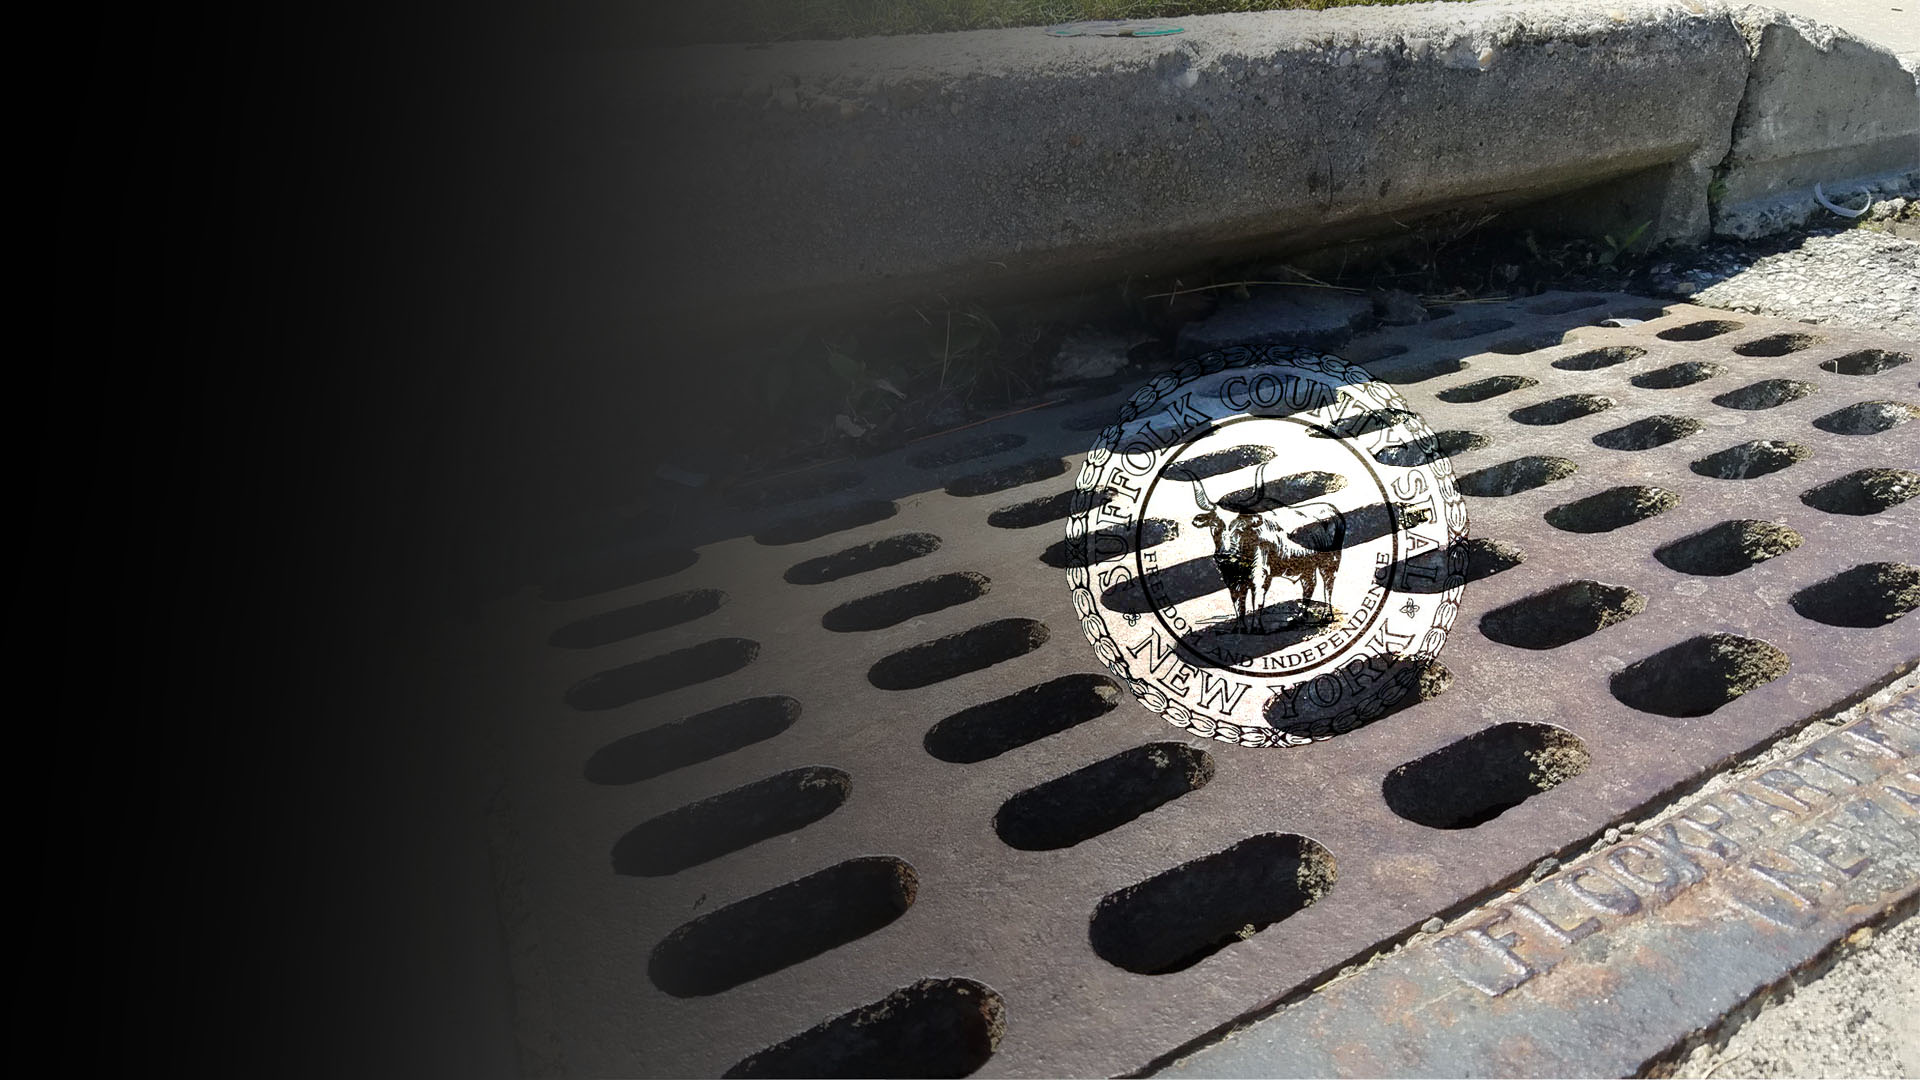 All Storm Drains Inc. | Parking Lot Catch Basin Service | Suffolk County, Long Island, NY | Phone: 516.825.1010 Fax: 631.475.2898 | George@AllStormDrains.com